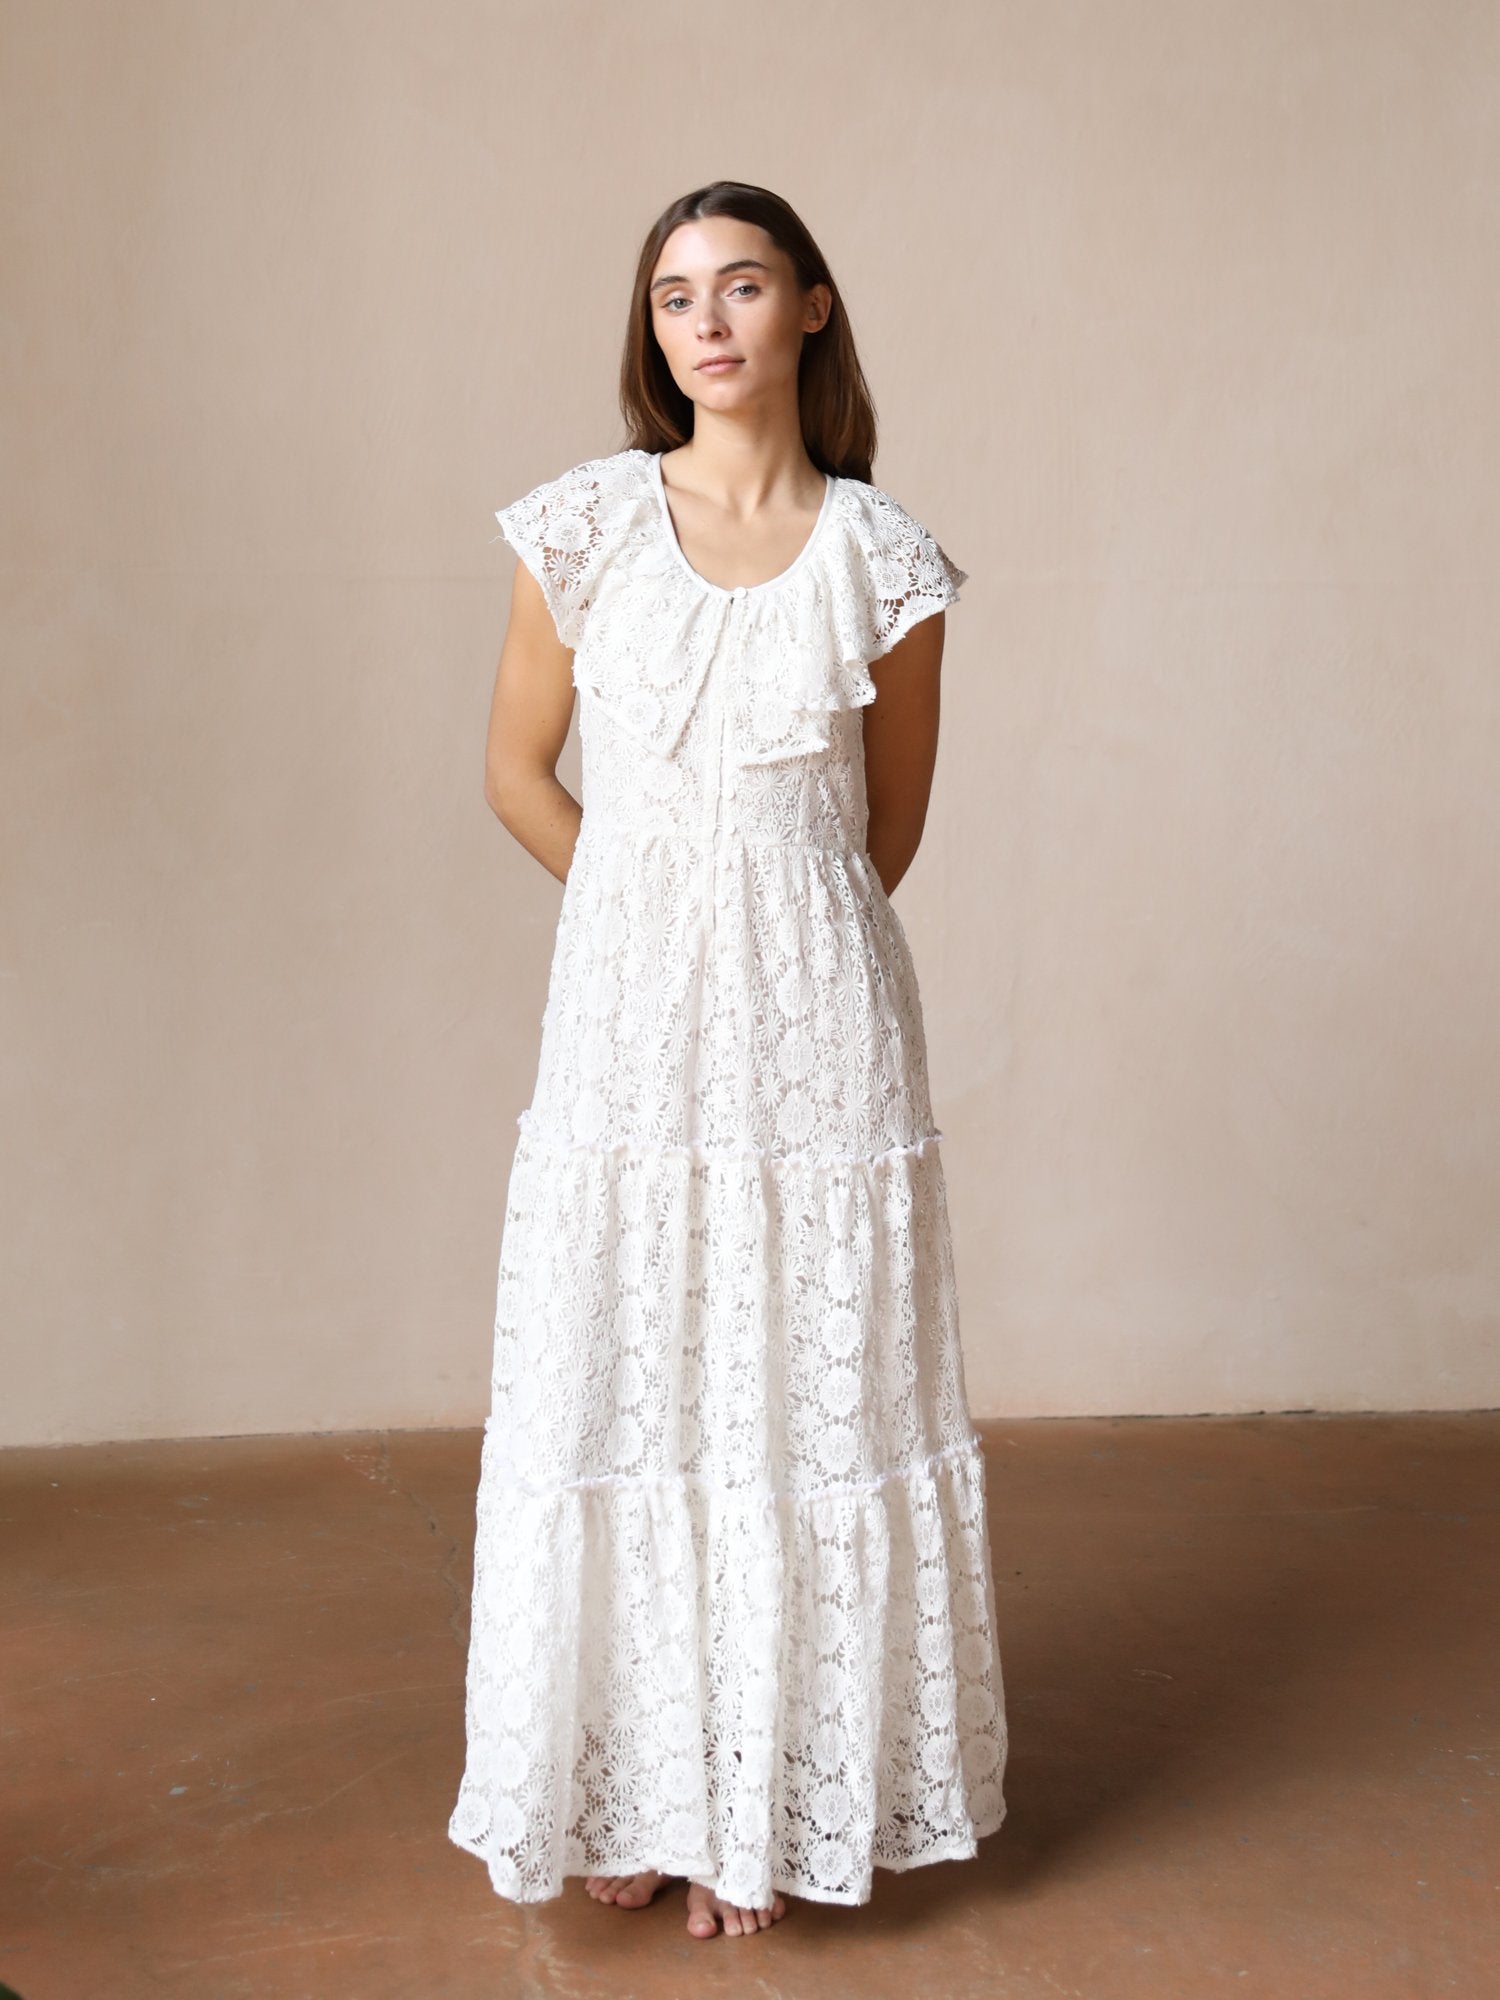 MILLE Clothing Mira Dress in Pearl Lace